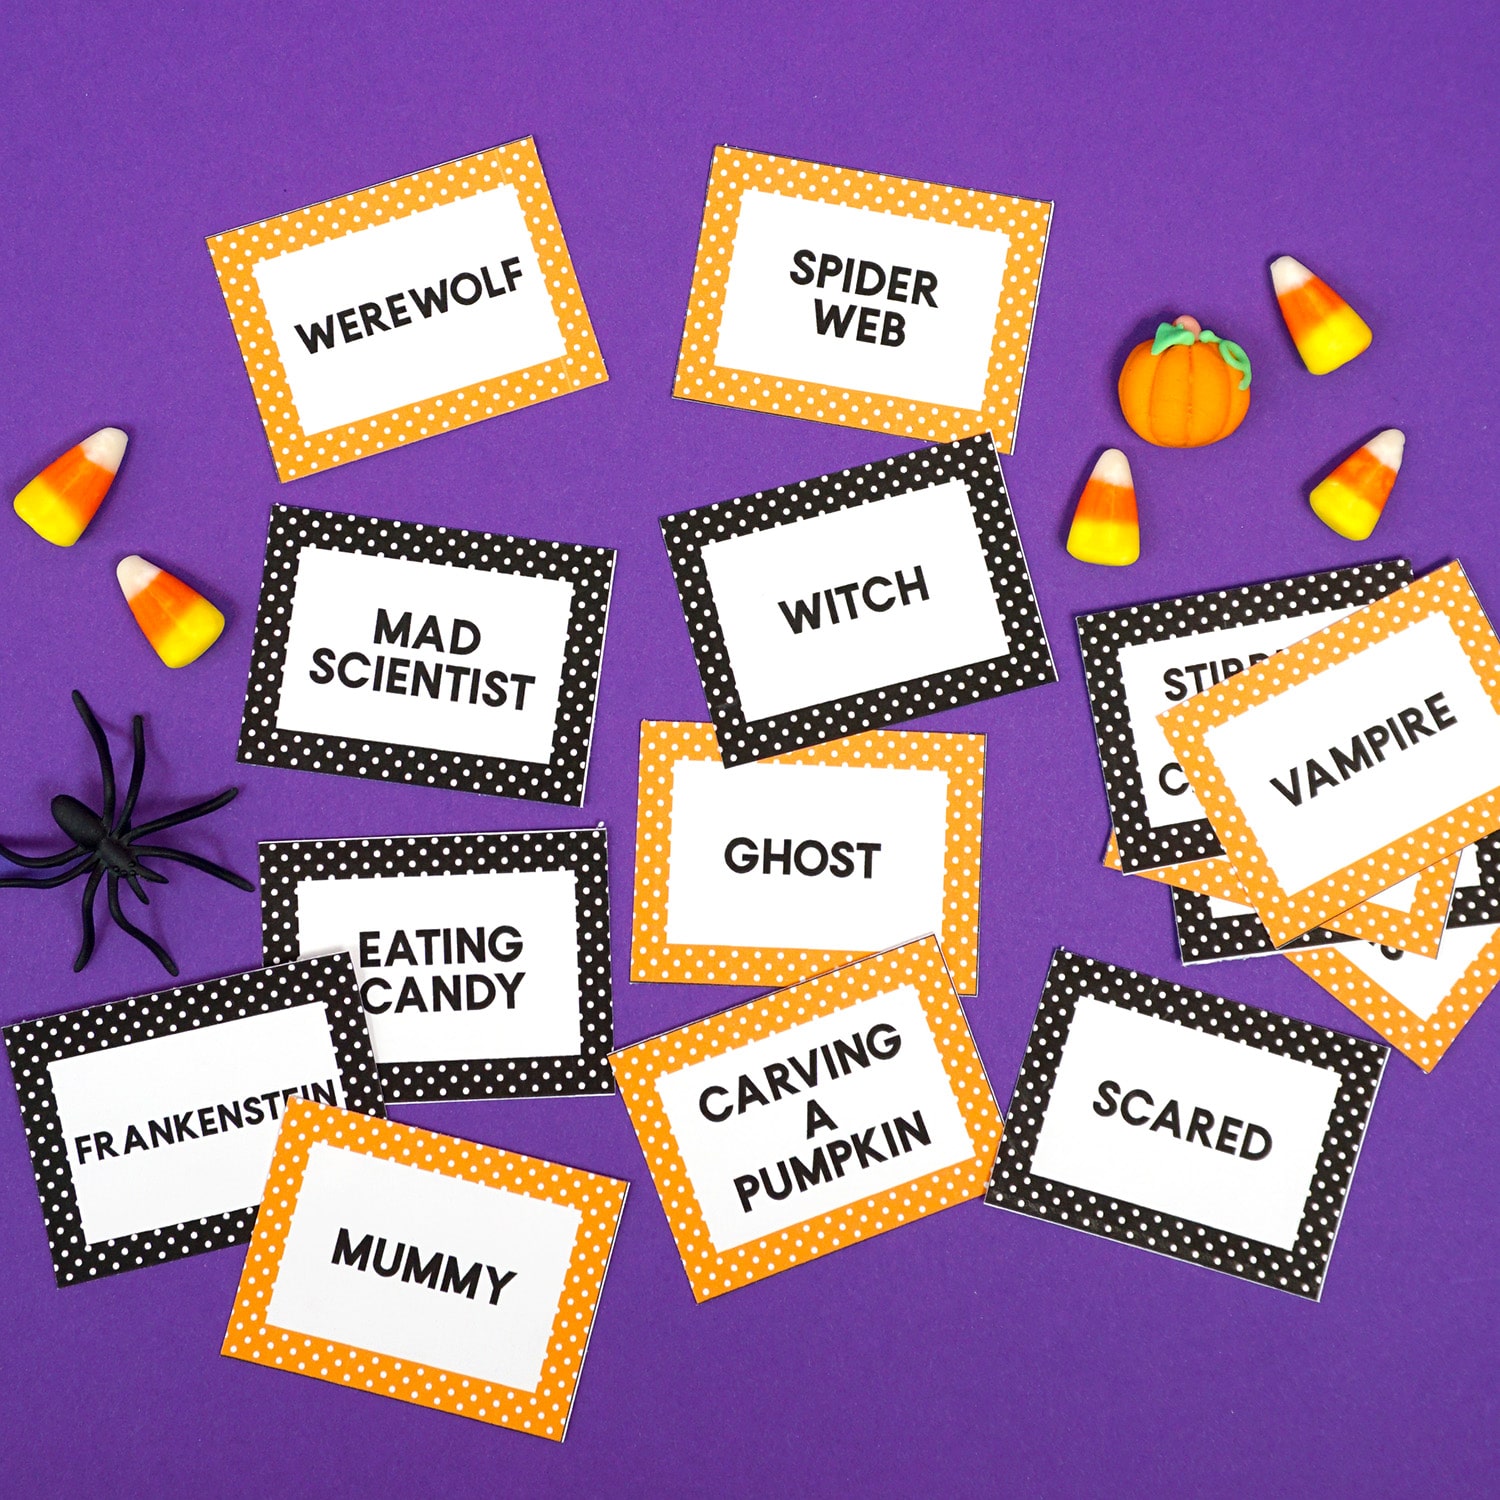 https://www.happinessishomemade.net/wp-content/uploads/2019/09/Halloween-Charades-Printable-Game-Cards.jpg